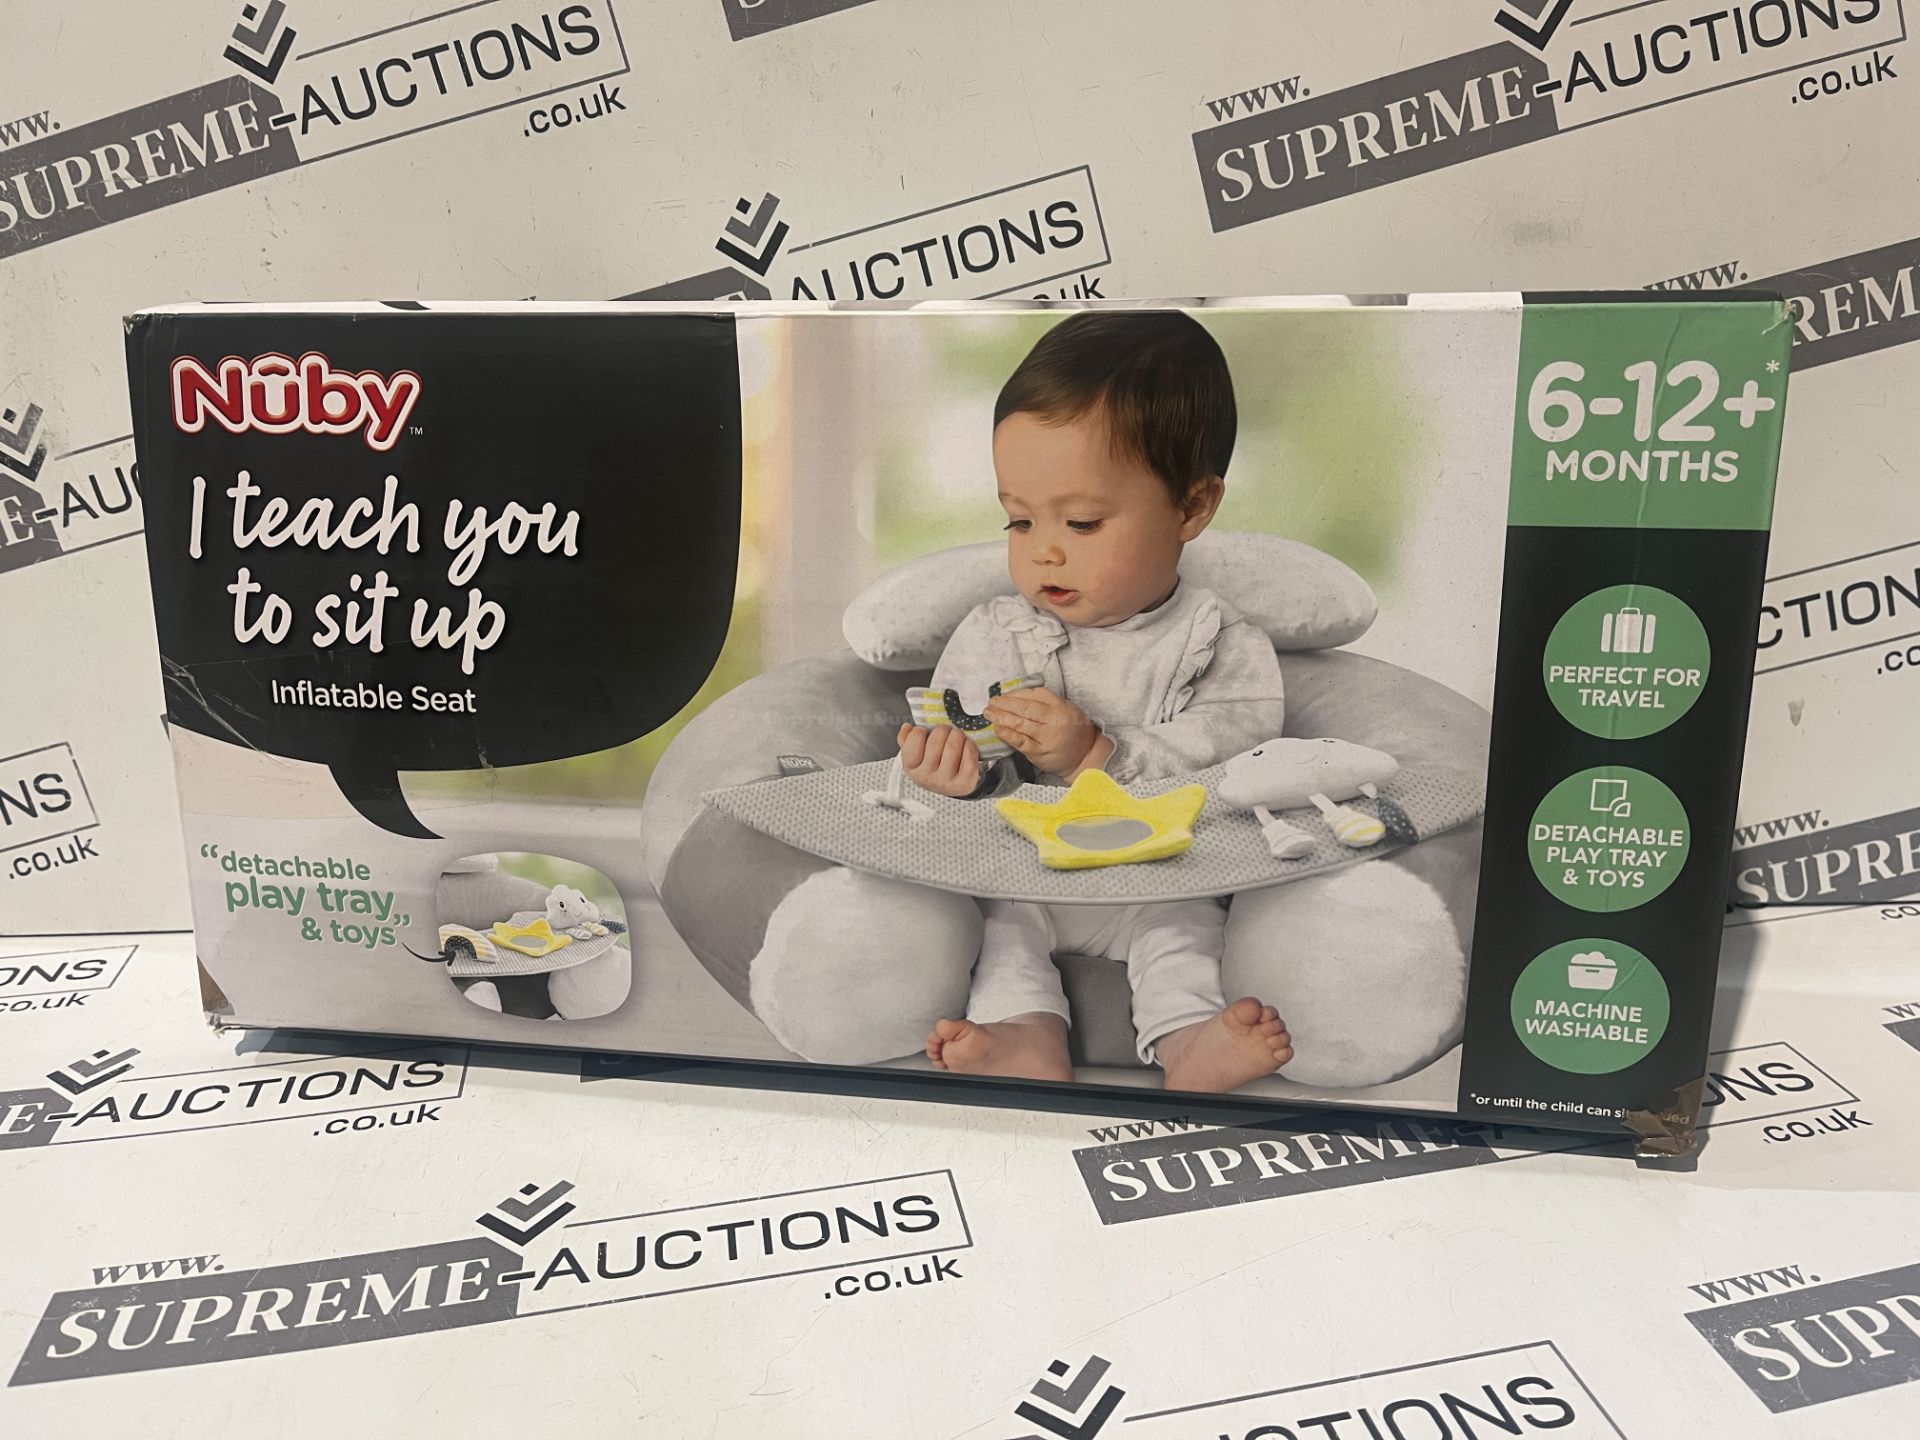 4 X NUBY INFLATABLE SEATS, I TEACH YOU TO SIT UP R15-10